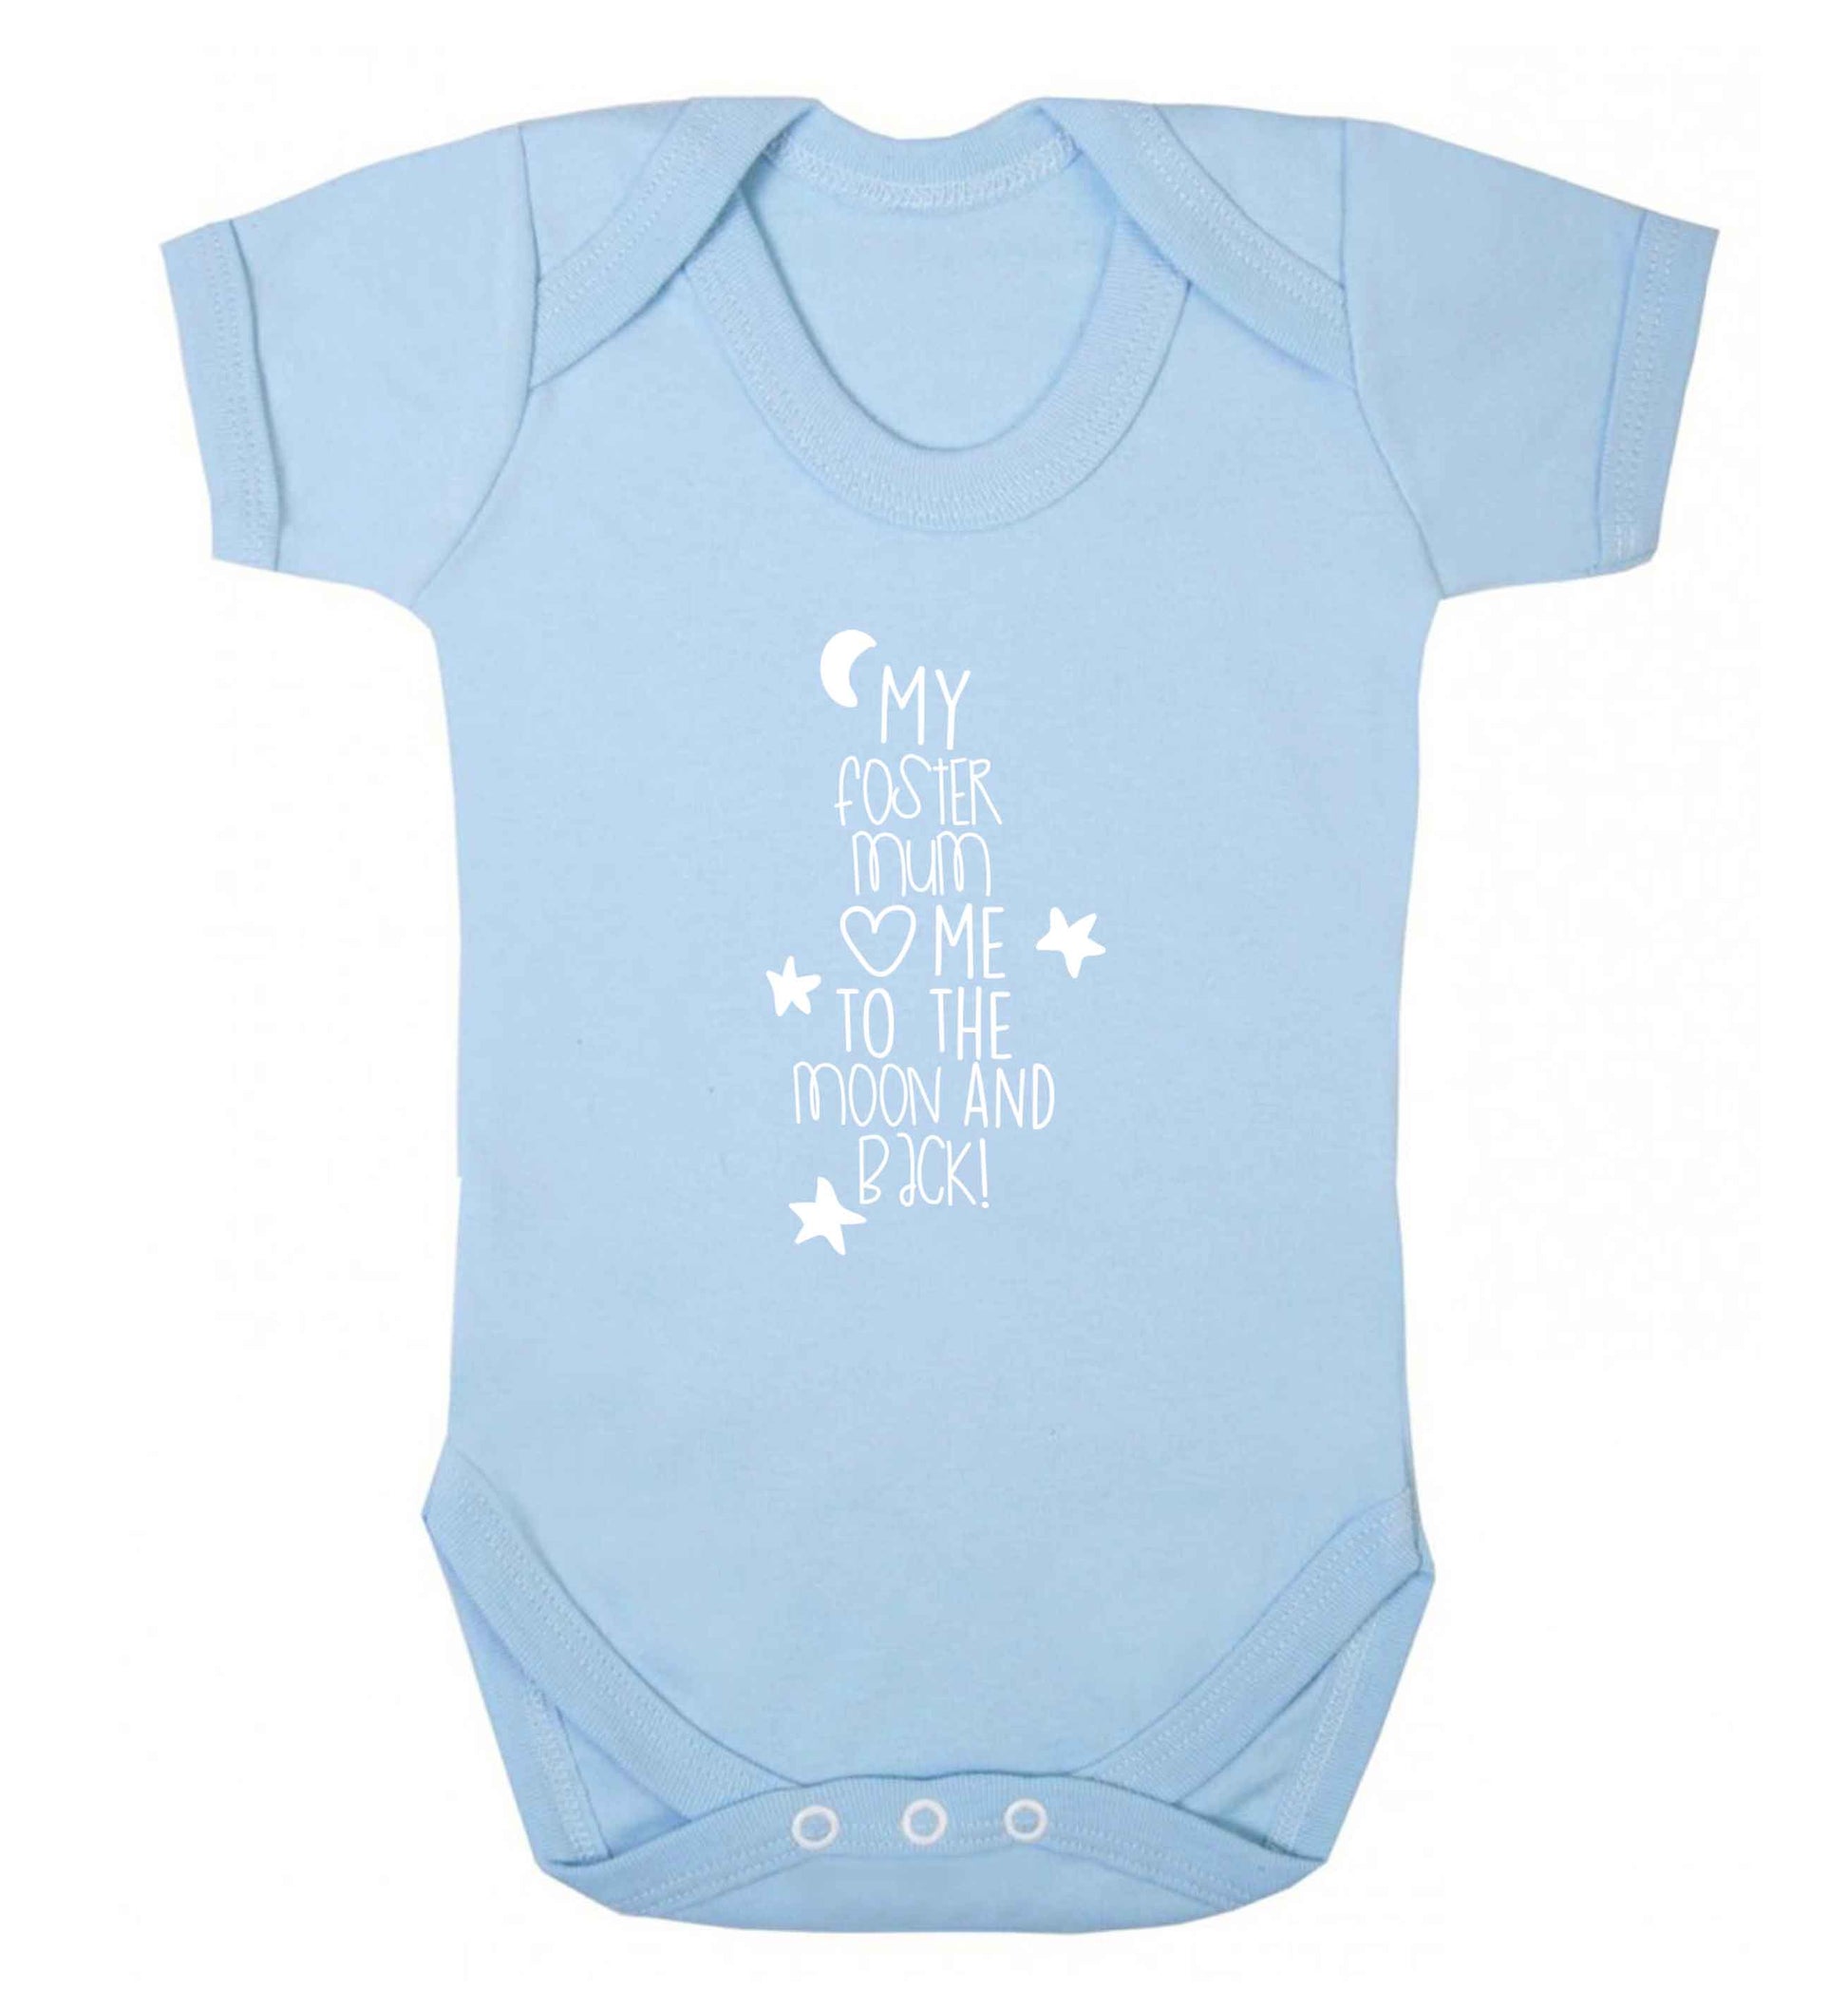 My foster mum loves me to the moon and back baby vest pale blue 18-24 months